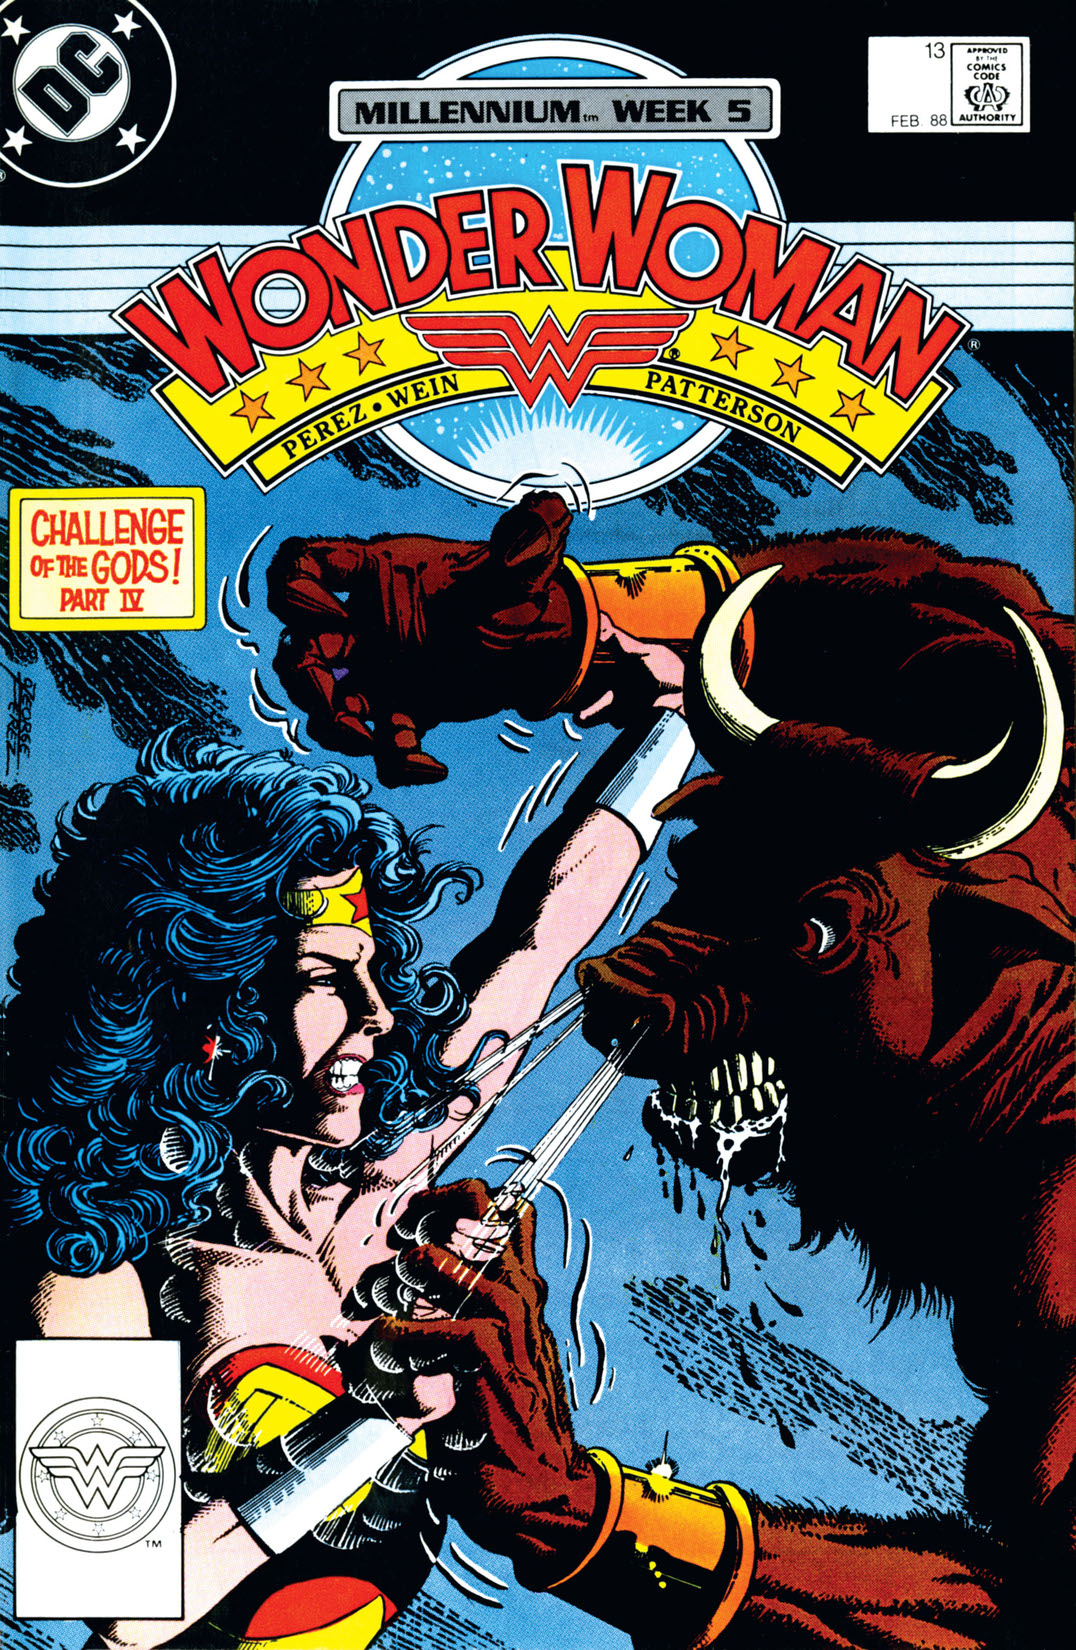 Wonder Woman (1986-2006) #13 preview images